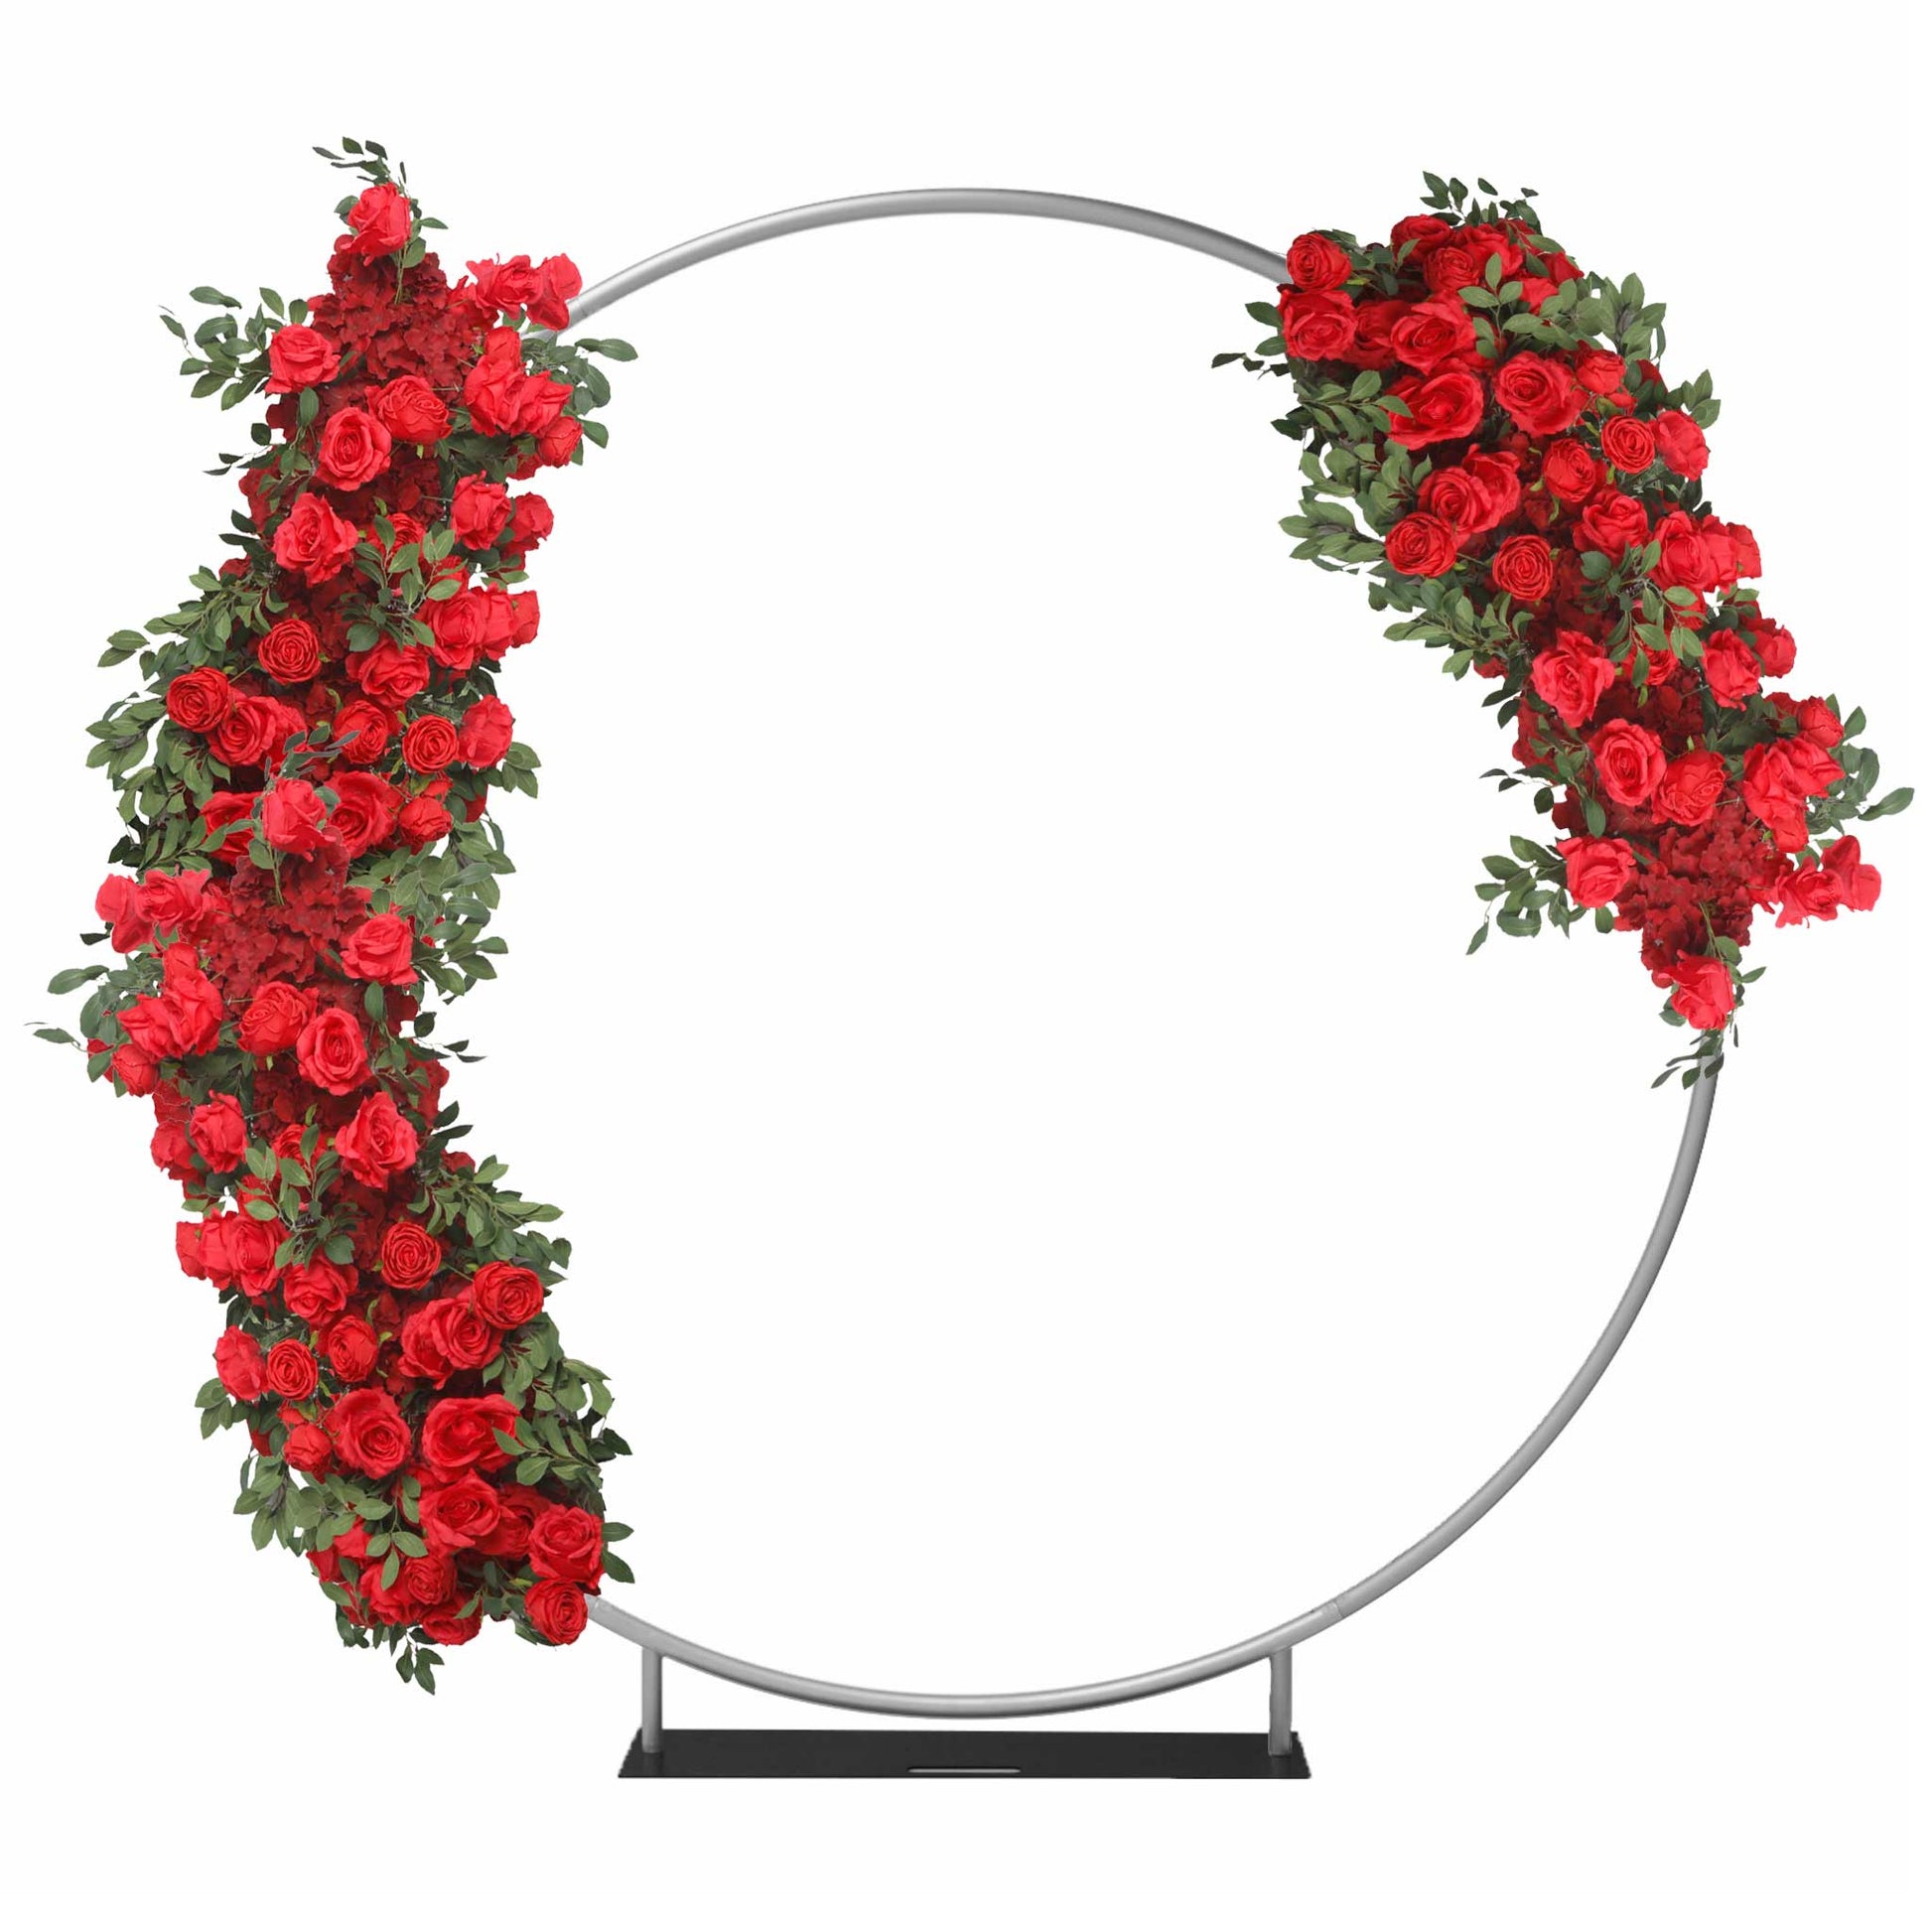 Premade Flower Backdrop Arch/Table Runner Decor - Red